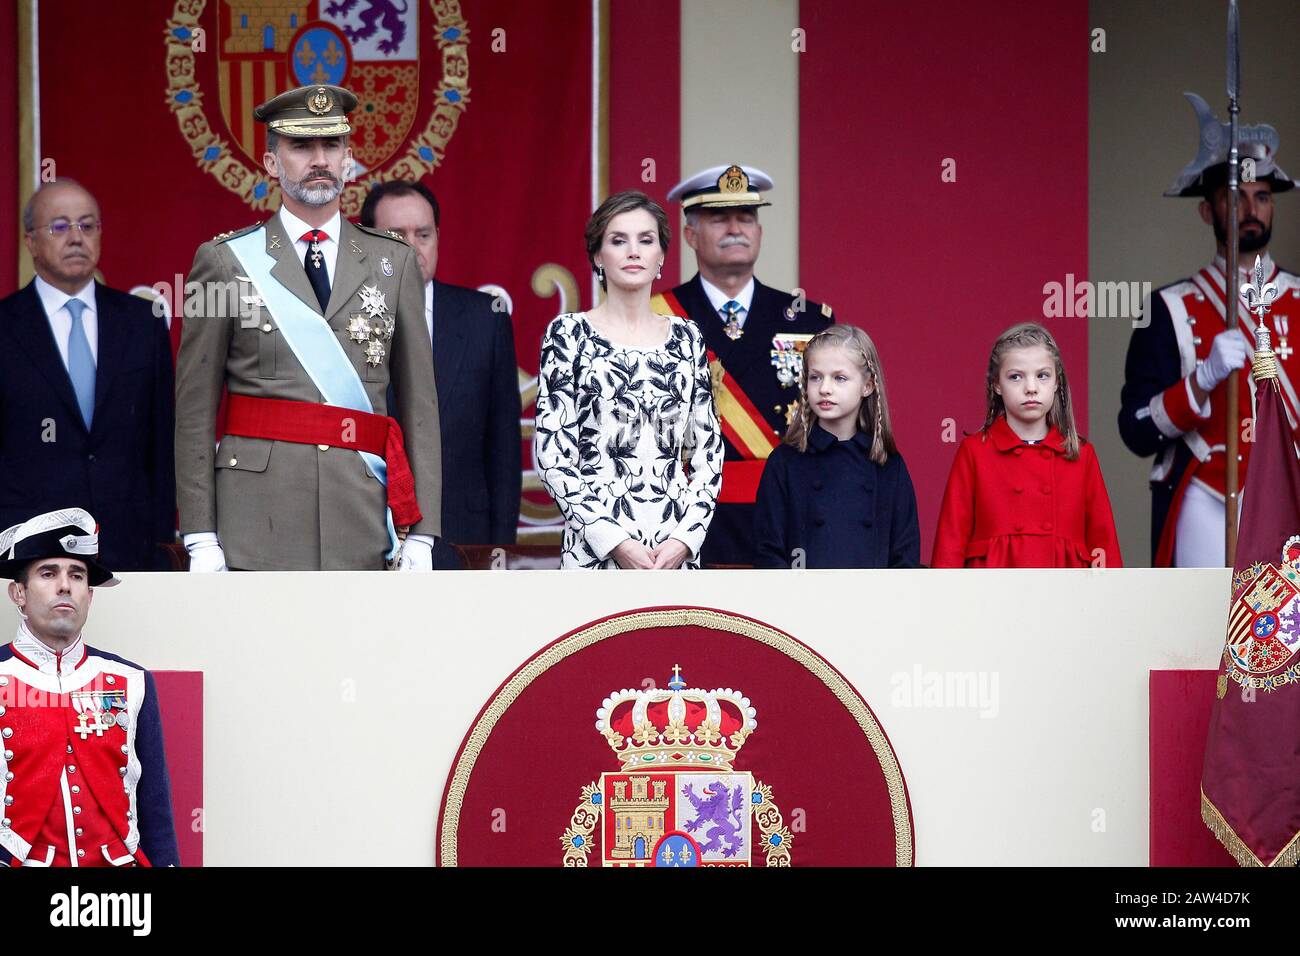 (L-R) King Felipe VI of Spain, Queen Letizia of Spain, Princess Leonor of Spain and Princess Sofia of Spain attend the National Day military parade. O Stock Photo